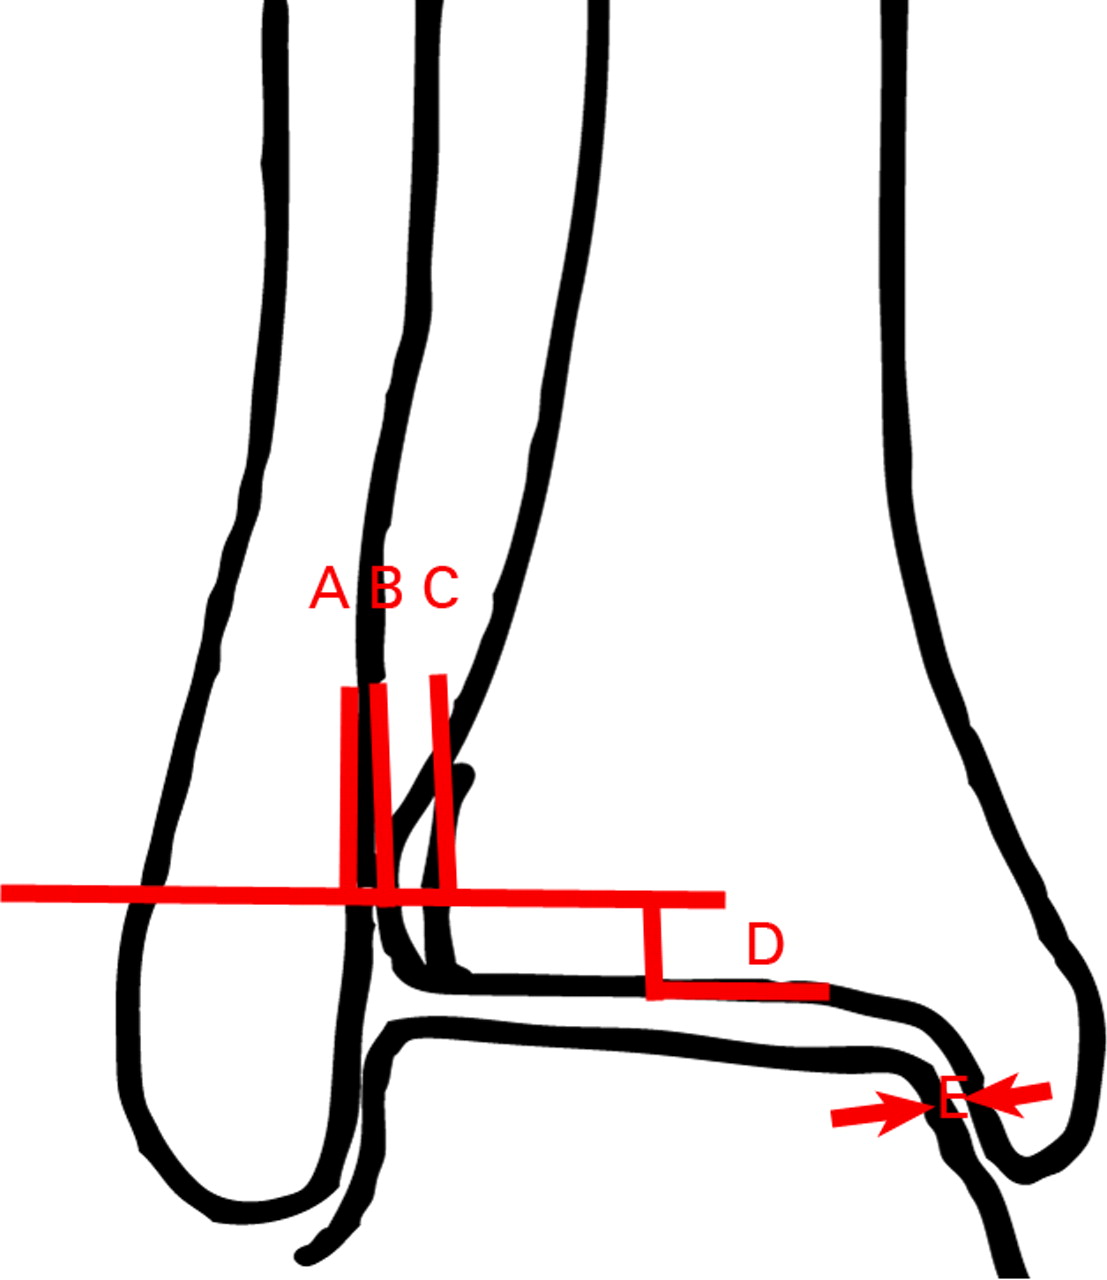 Fig. 1 
          Diagram showing the typical syndesmotic
relationship in patients without overlap between the tibia and fibula
(A, medial fibular border; B, anterior tibial tubercule; C, lateral
border of the posterior tibia; D, plane 1 cm above plafond; E, medial
clear space; AC, tibiofibular clear space). The distance AB in these
patients is positive.
        